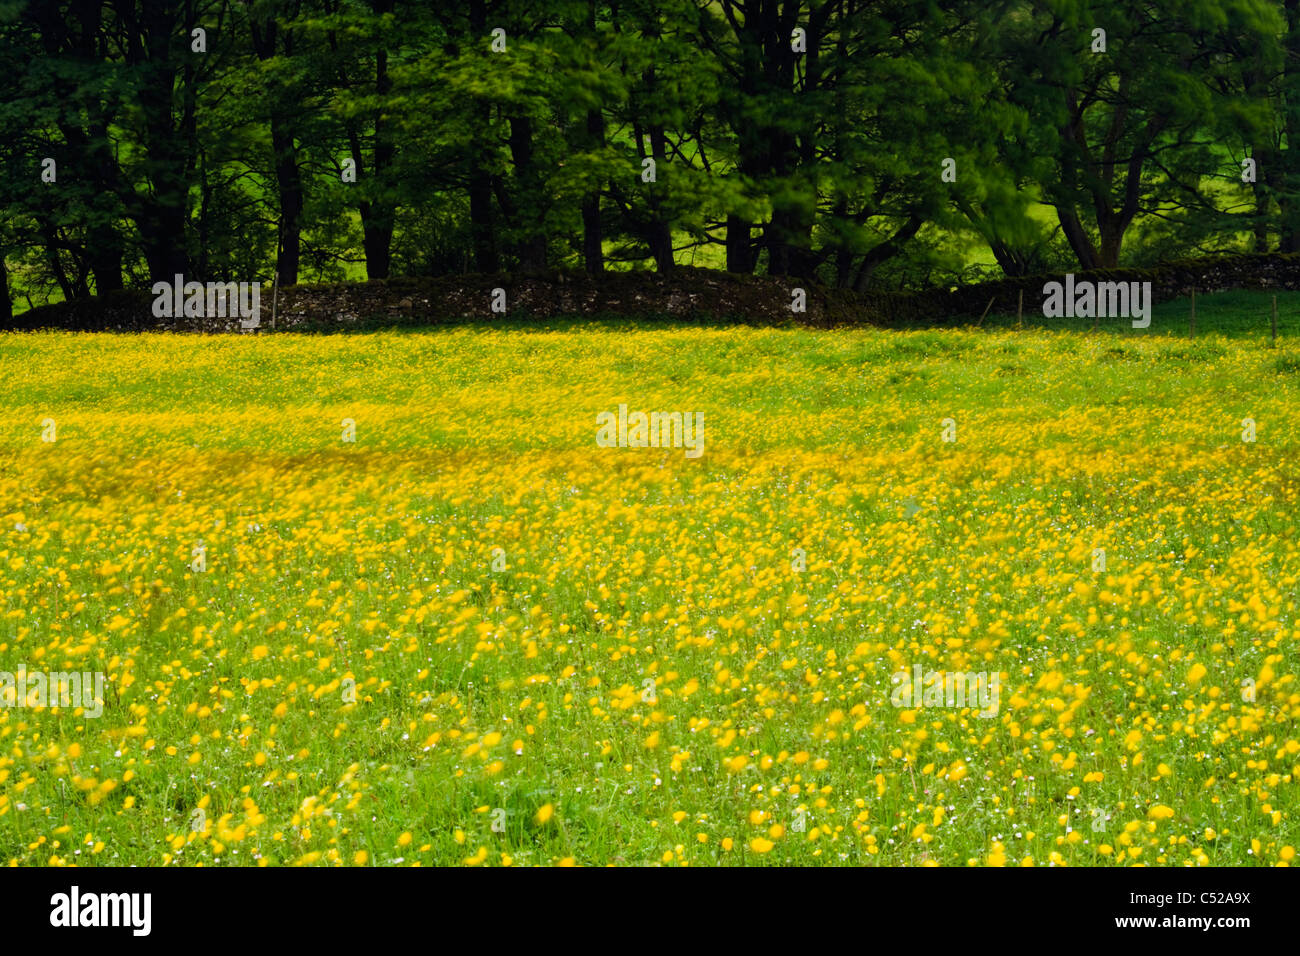 Windblown buttercups in field, Yorkshire Dales National Park, Yorkshire, UK. Stock Photo